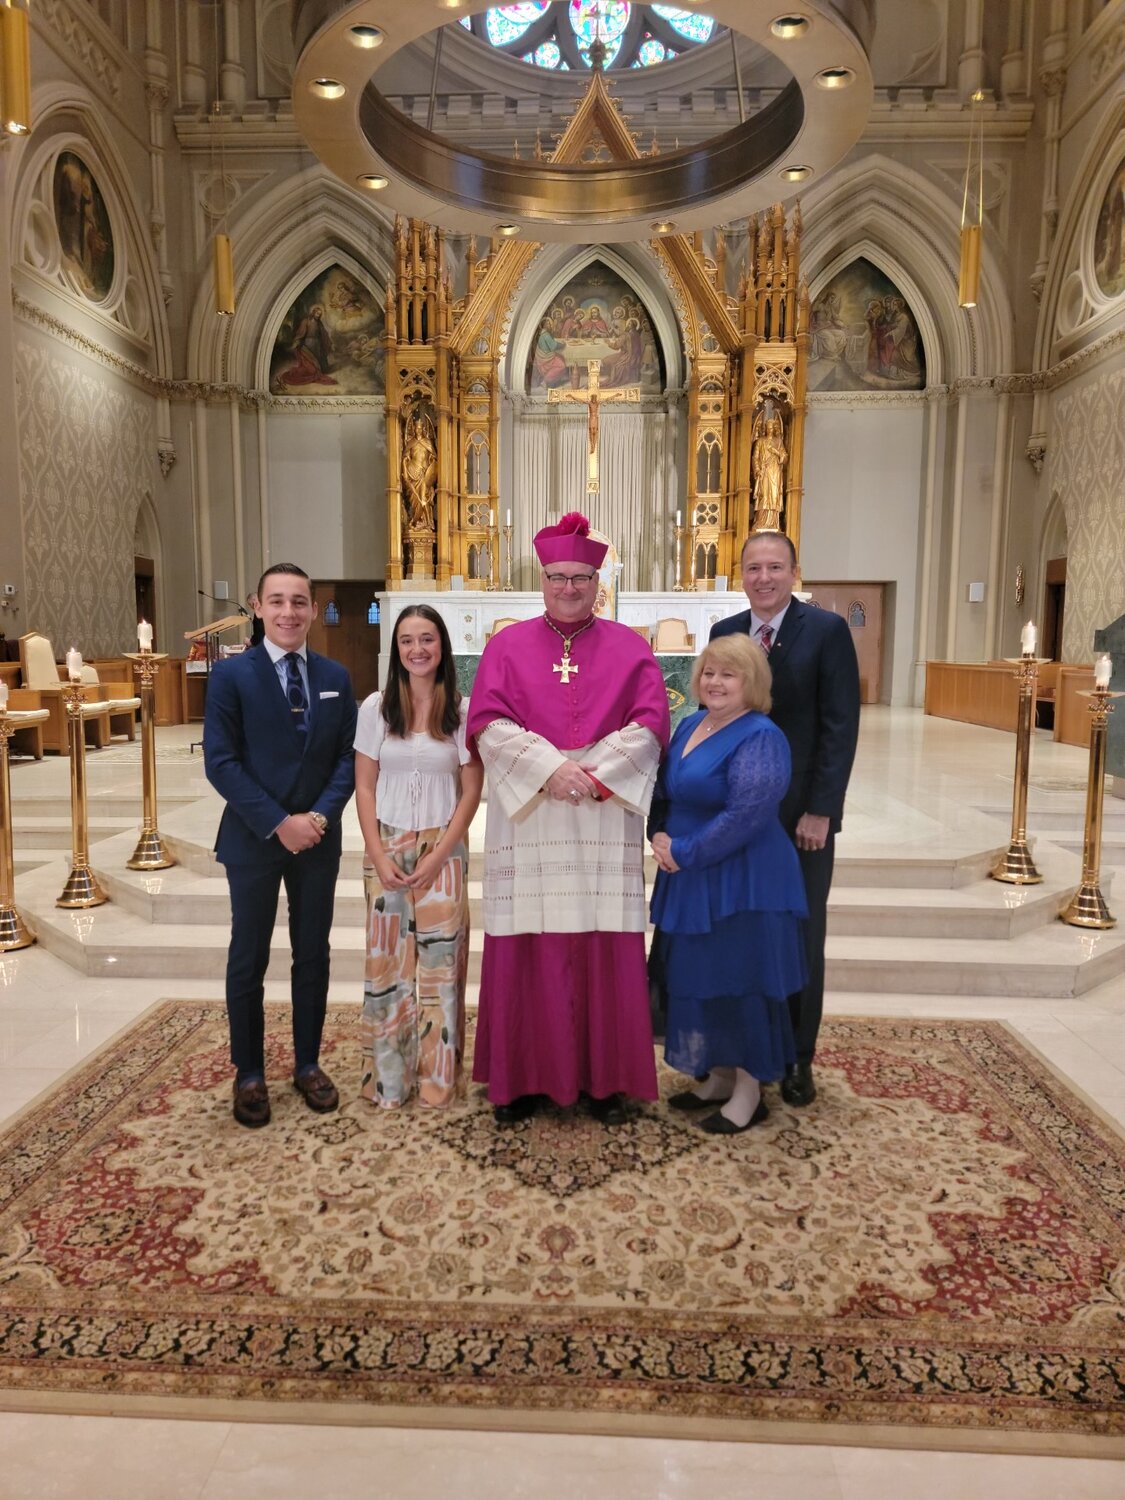 Bishop Richard G. Henning smiles with this year’s Human Life Guild Awardees including, from left, Joshua Kline, Riley Morin, and Laurie and David Mitchel.